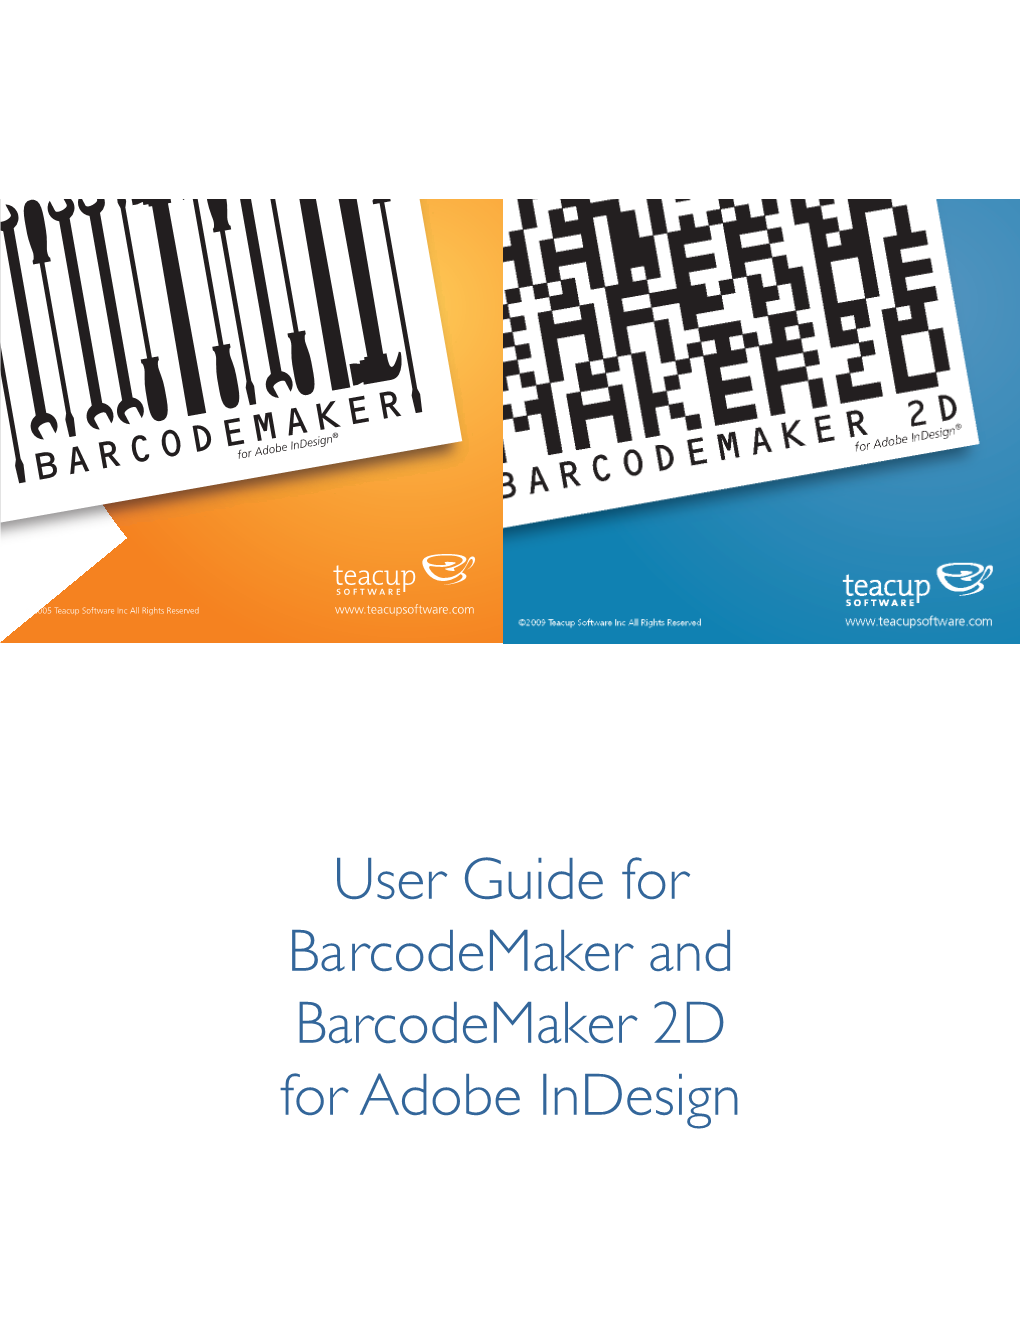 User Guide for Barcodemaker and Barcodemaker 2D for Adobe Indesign Simple, Elegant Solutions for Adobe Indesign